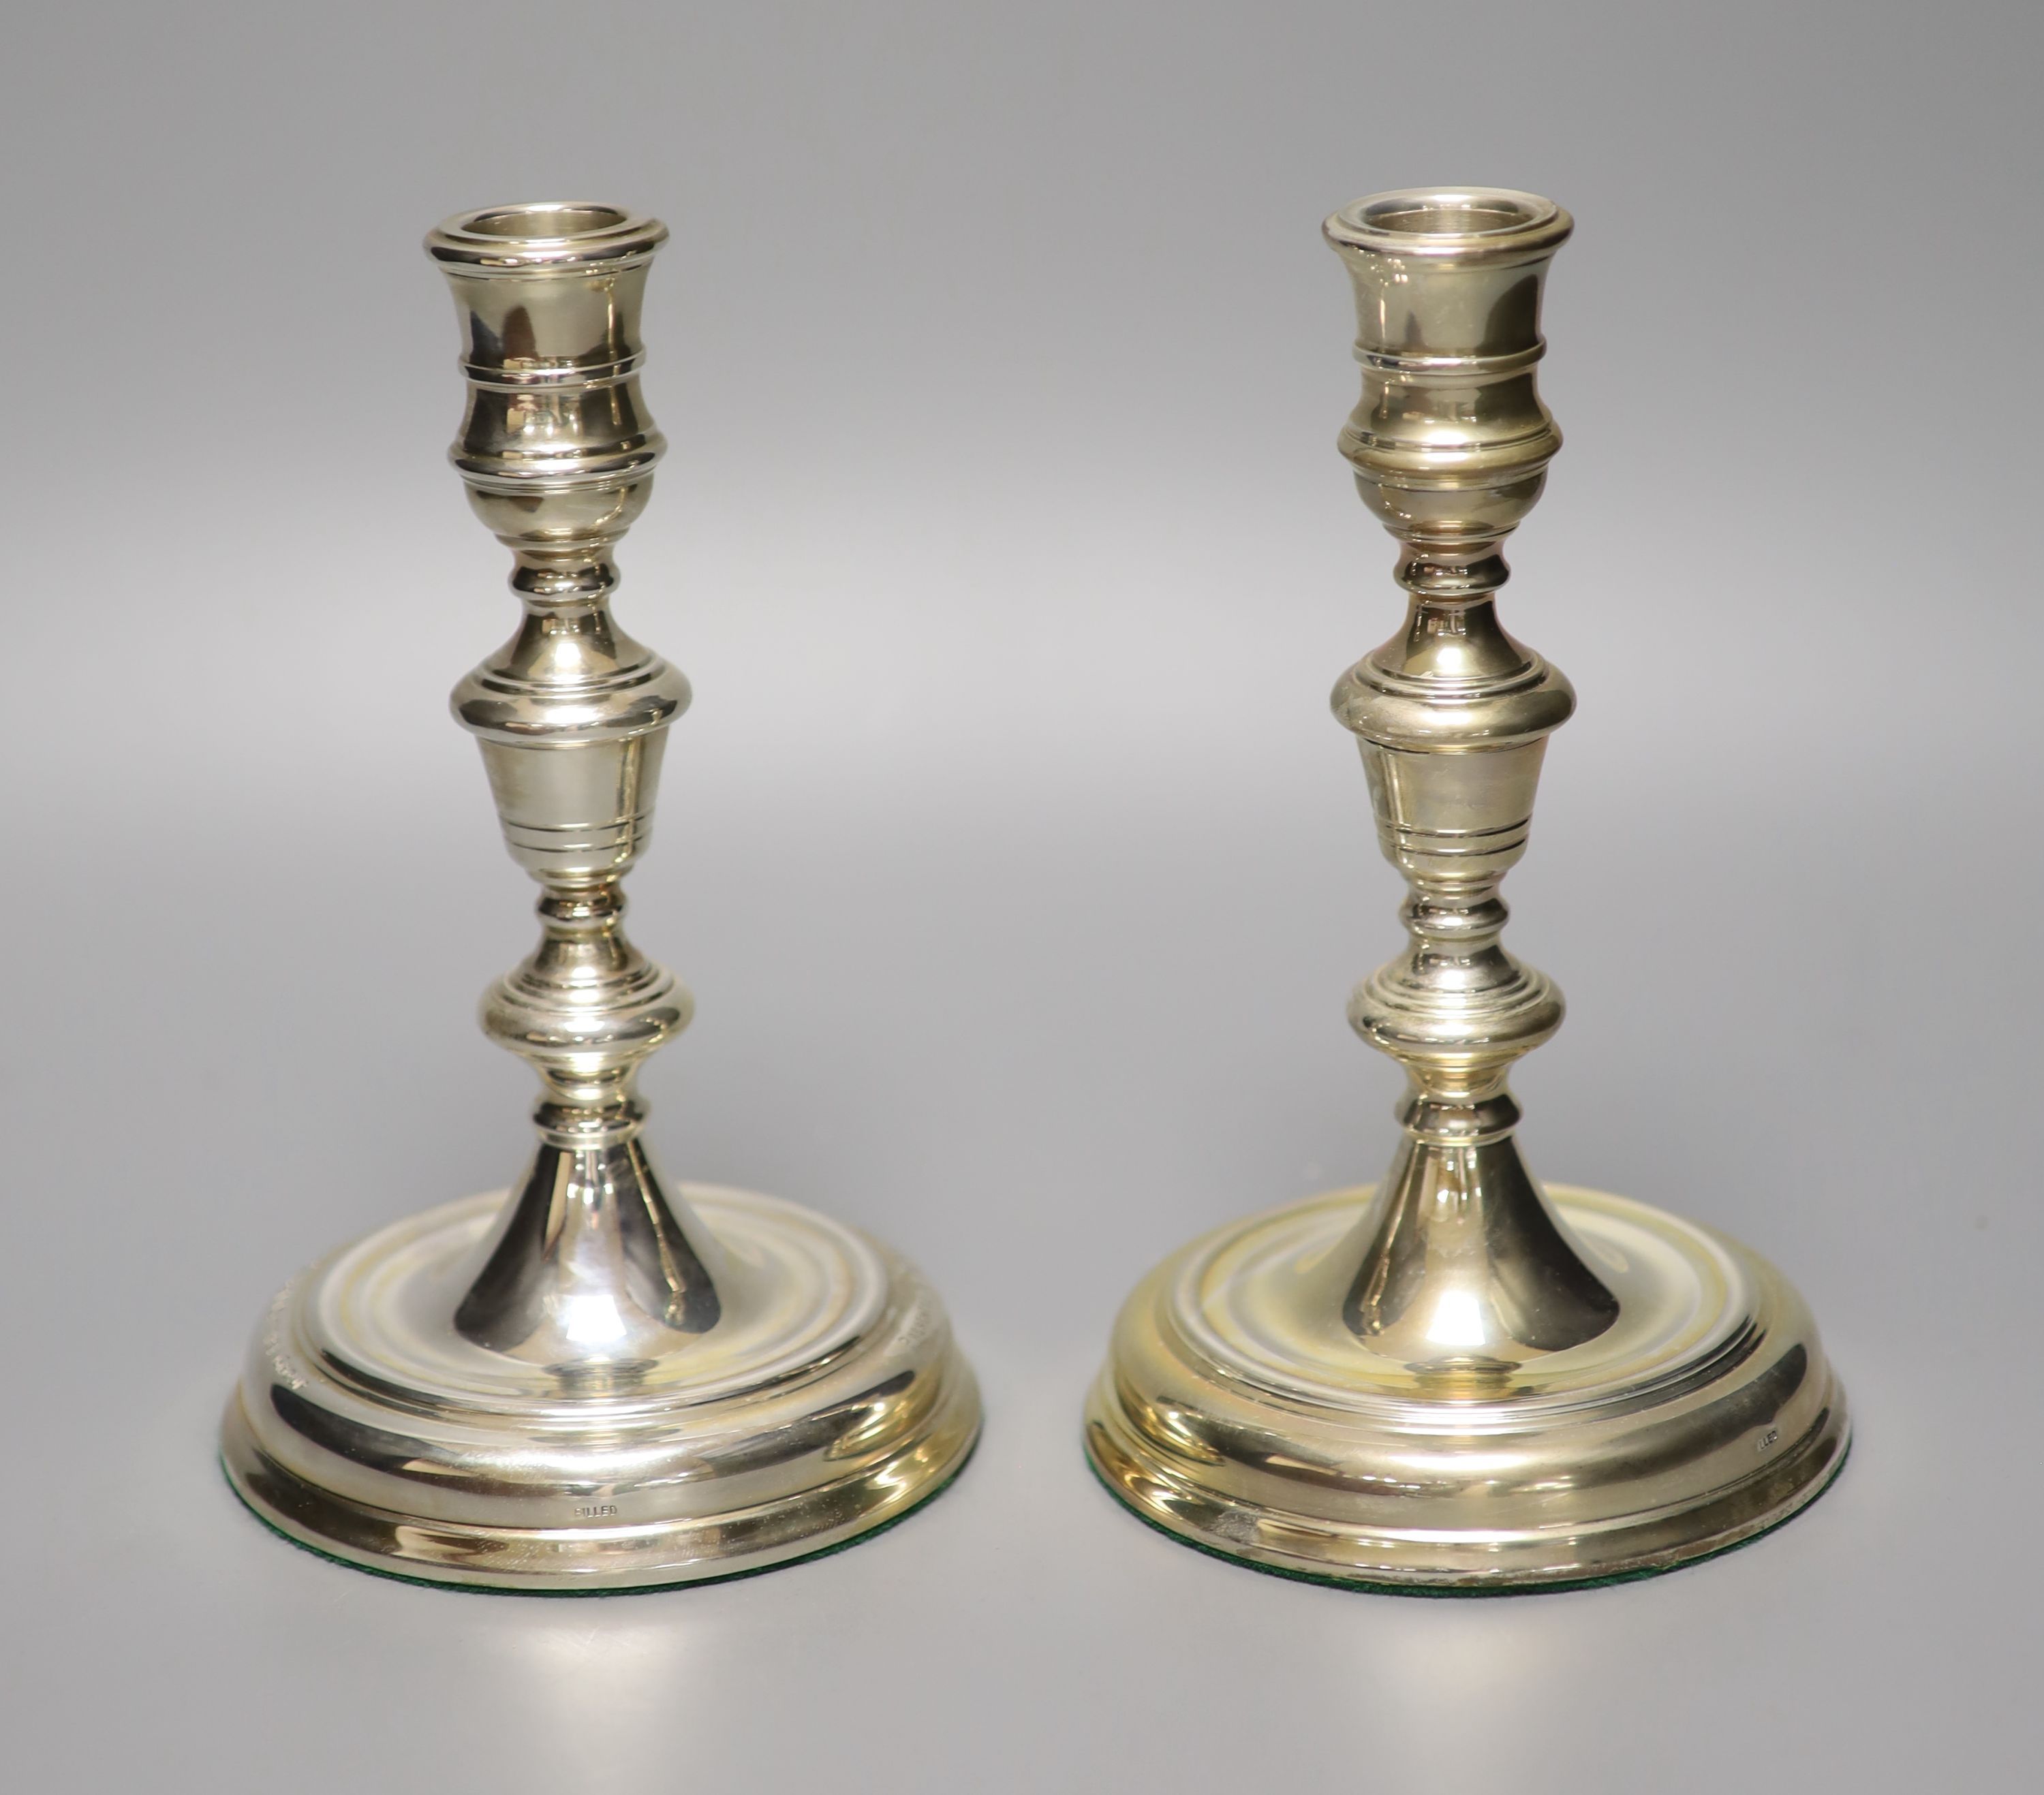 A pair of George II style silver presentation candlesticks, weighted, London 1986, David Shaw Silverware Ltd, in fitted case